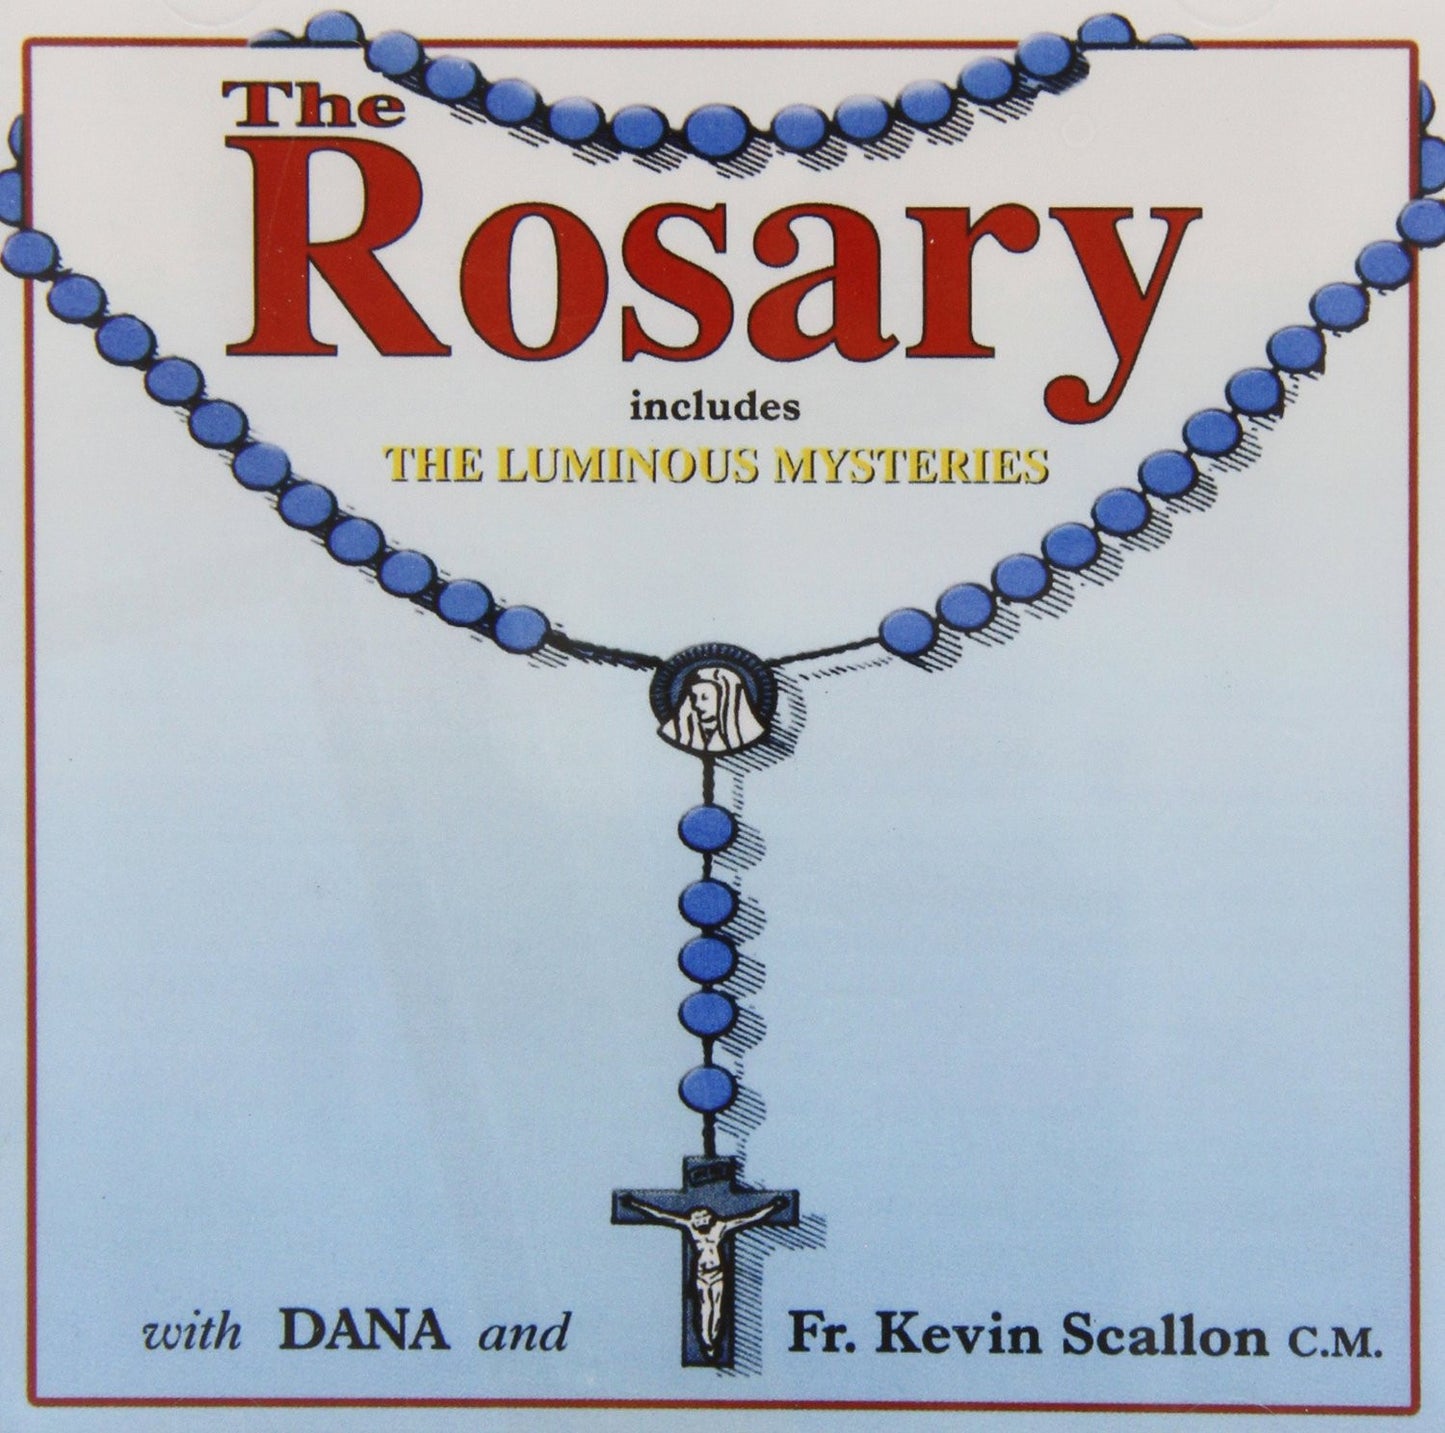 The Rosary - includes The Luminous Mysteries